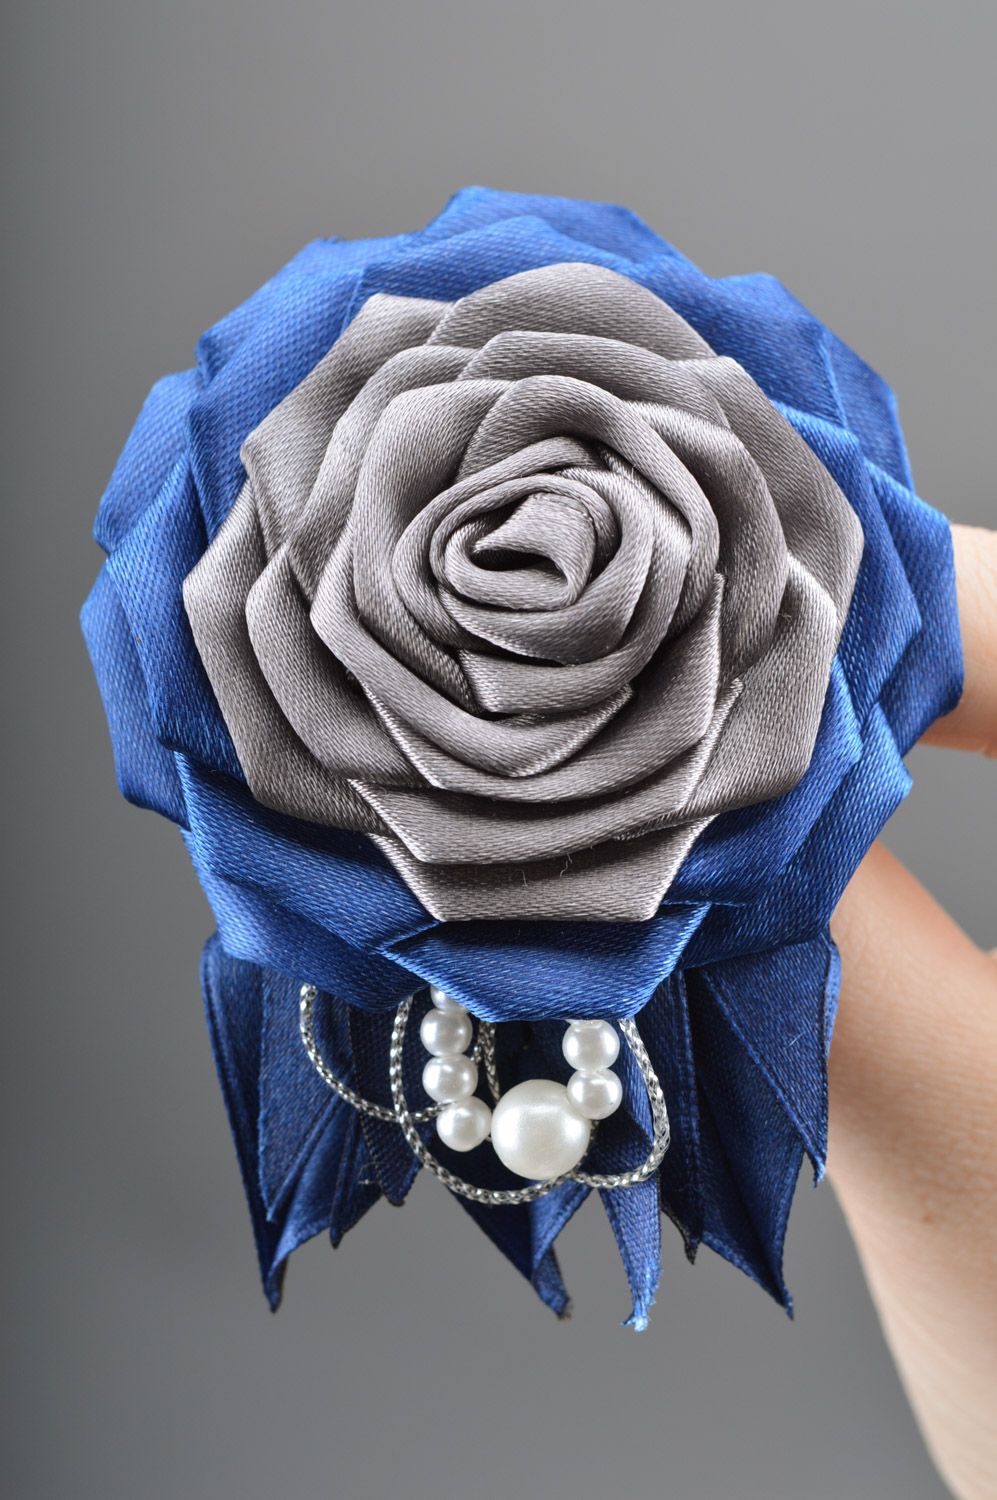 Handmade designer fabric brooch in the shape of blue and gray rose with beads photo 2